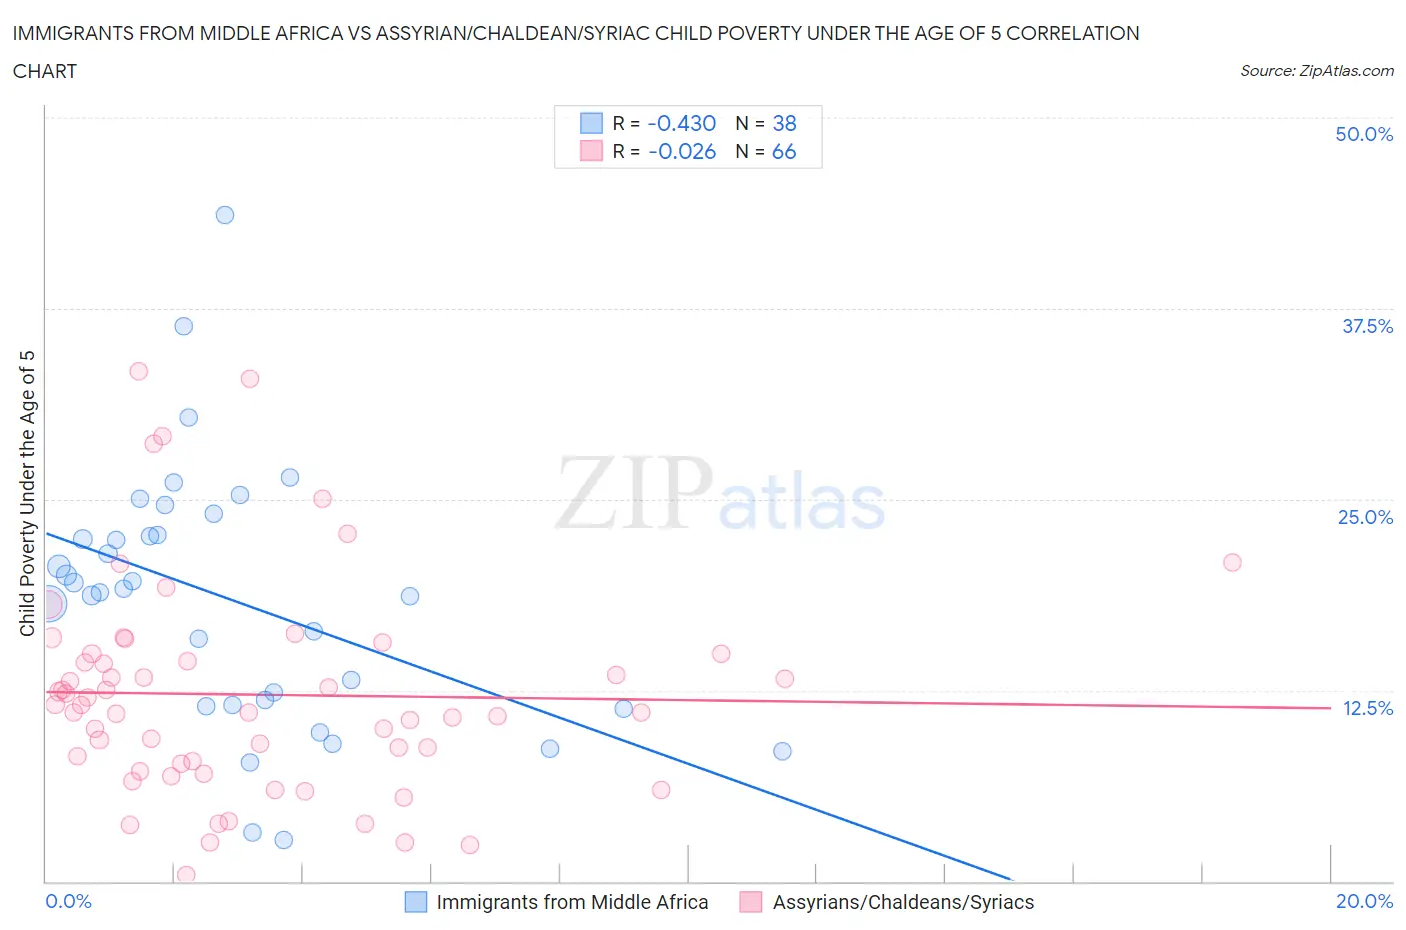 Immigrants from Middle Africa vs Assyrian/Chaldean/Syriac Child Poverty Under the Age of 5